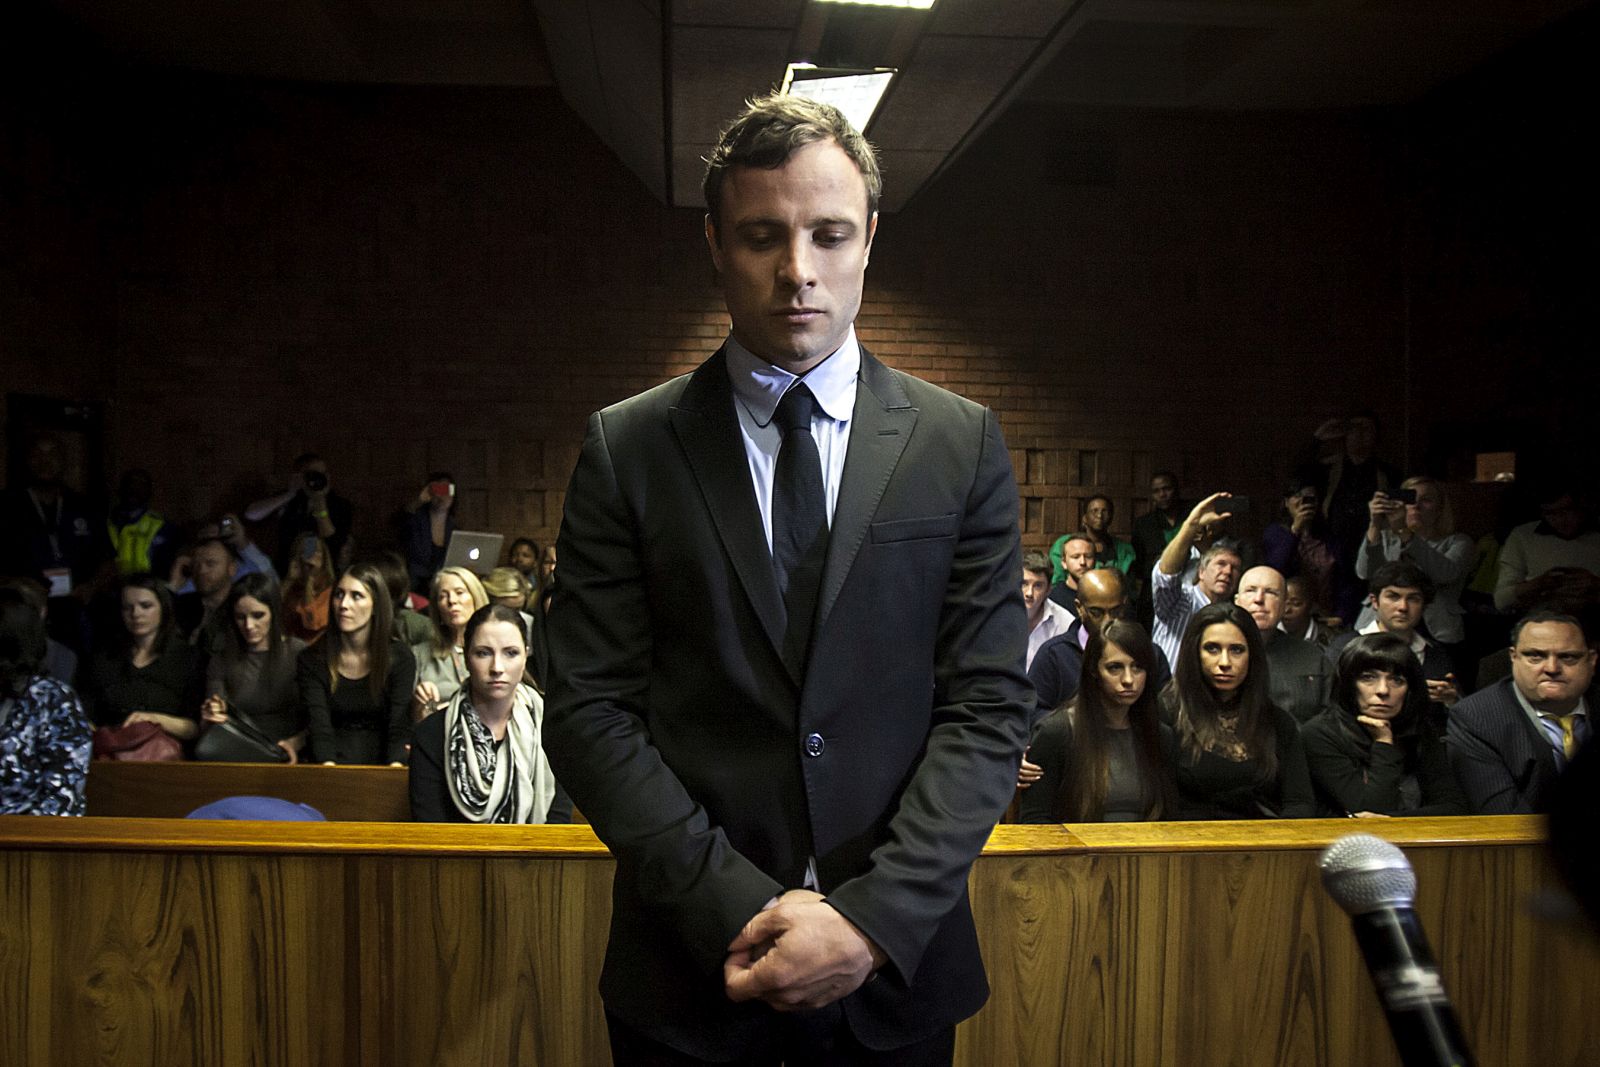 epa10549899 (FILE) Defendant Oscar Pistorius (C) appears in the Pretoria Magistrates court in Pretoria, South Africa, 19 August 2013 (reissued 30 March 2023). South Africa's Correctional Services holds a parole hearing for Oscar Pistorius on 31 March 2023. Former paralympic athlete Pistorius is serving a 13 years and five months imprisonment sentence after an appeal court ìn 2017 found him guilty of the murder of his girlfriend Reeva Steenkamp. Pistorius is eligible for parole after having served half of his sentence.  EPA/STRINGER *** Local Caption *** 50960865